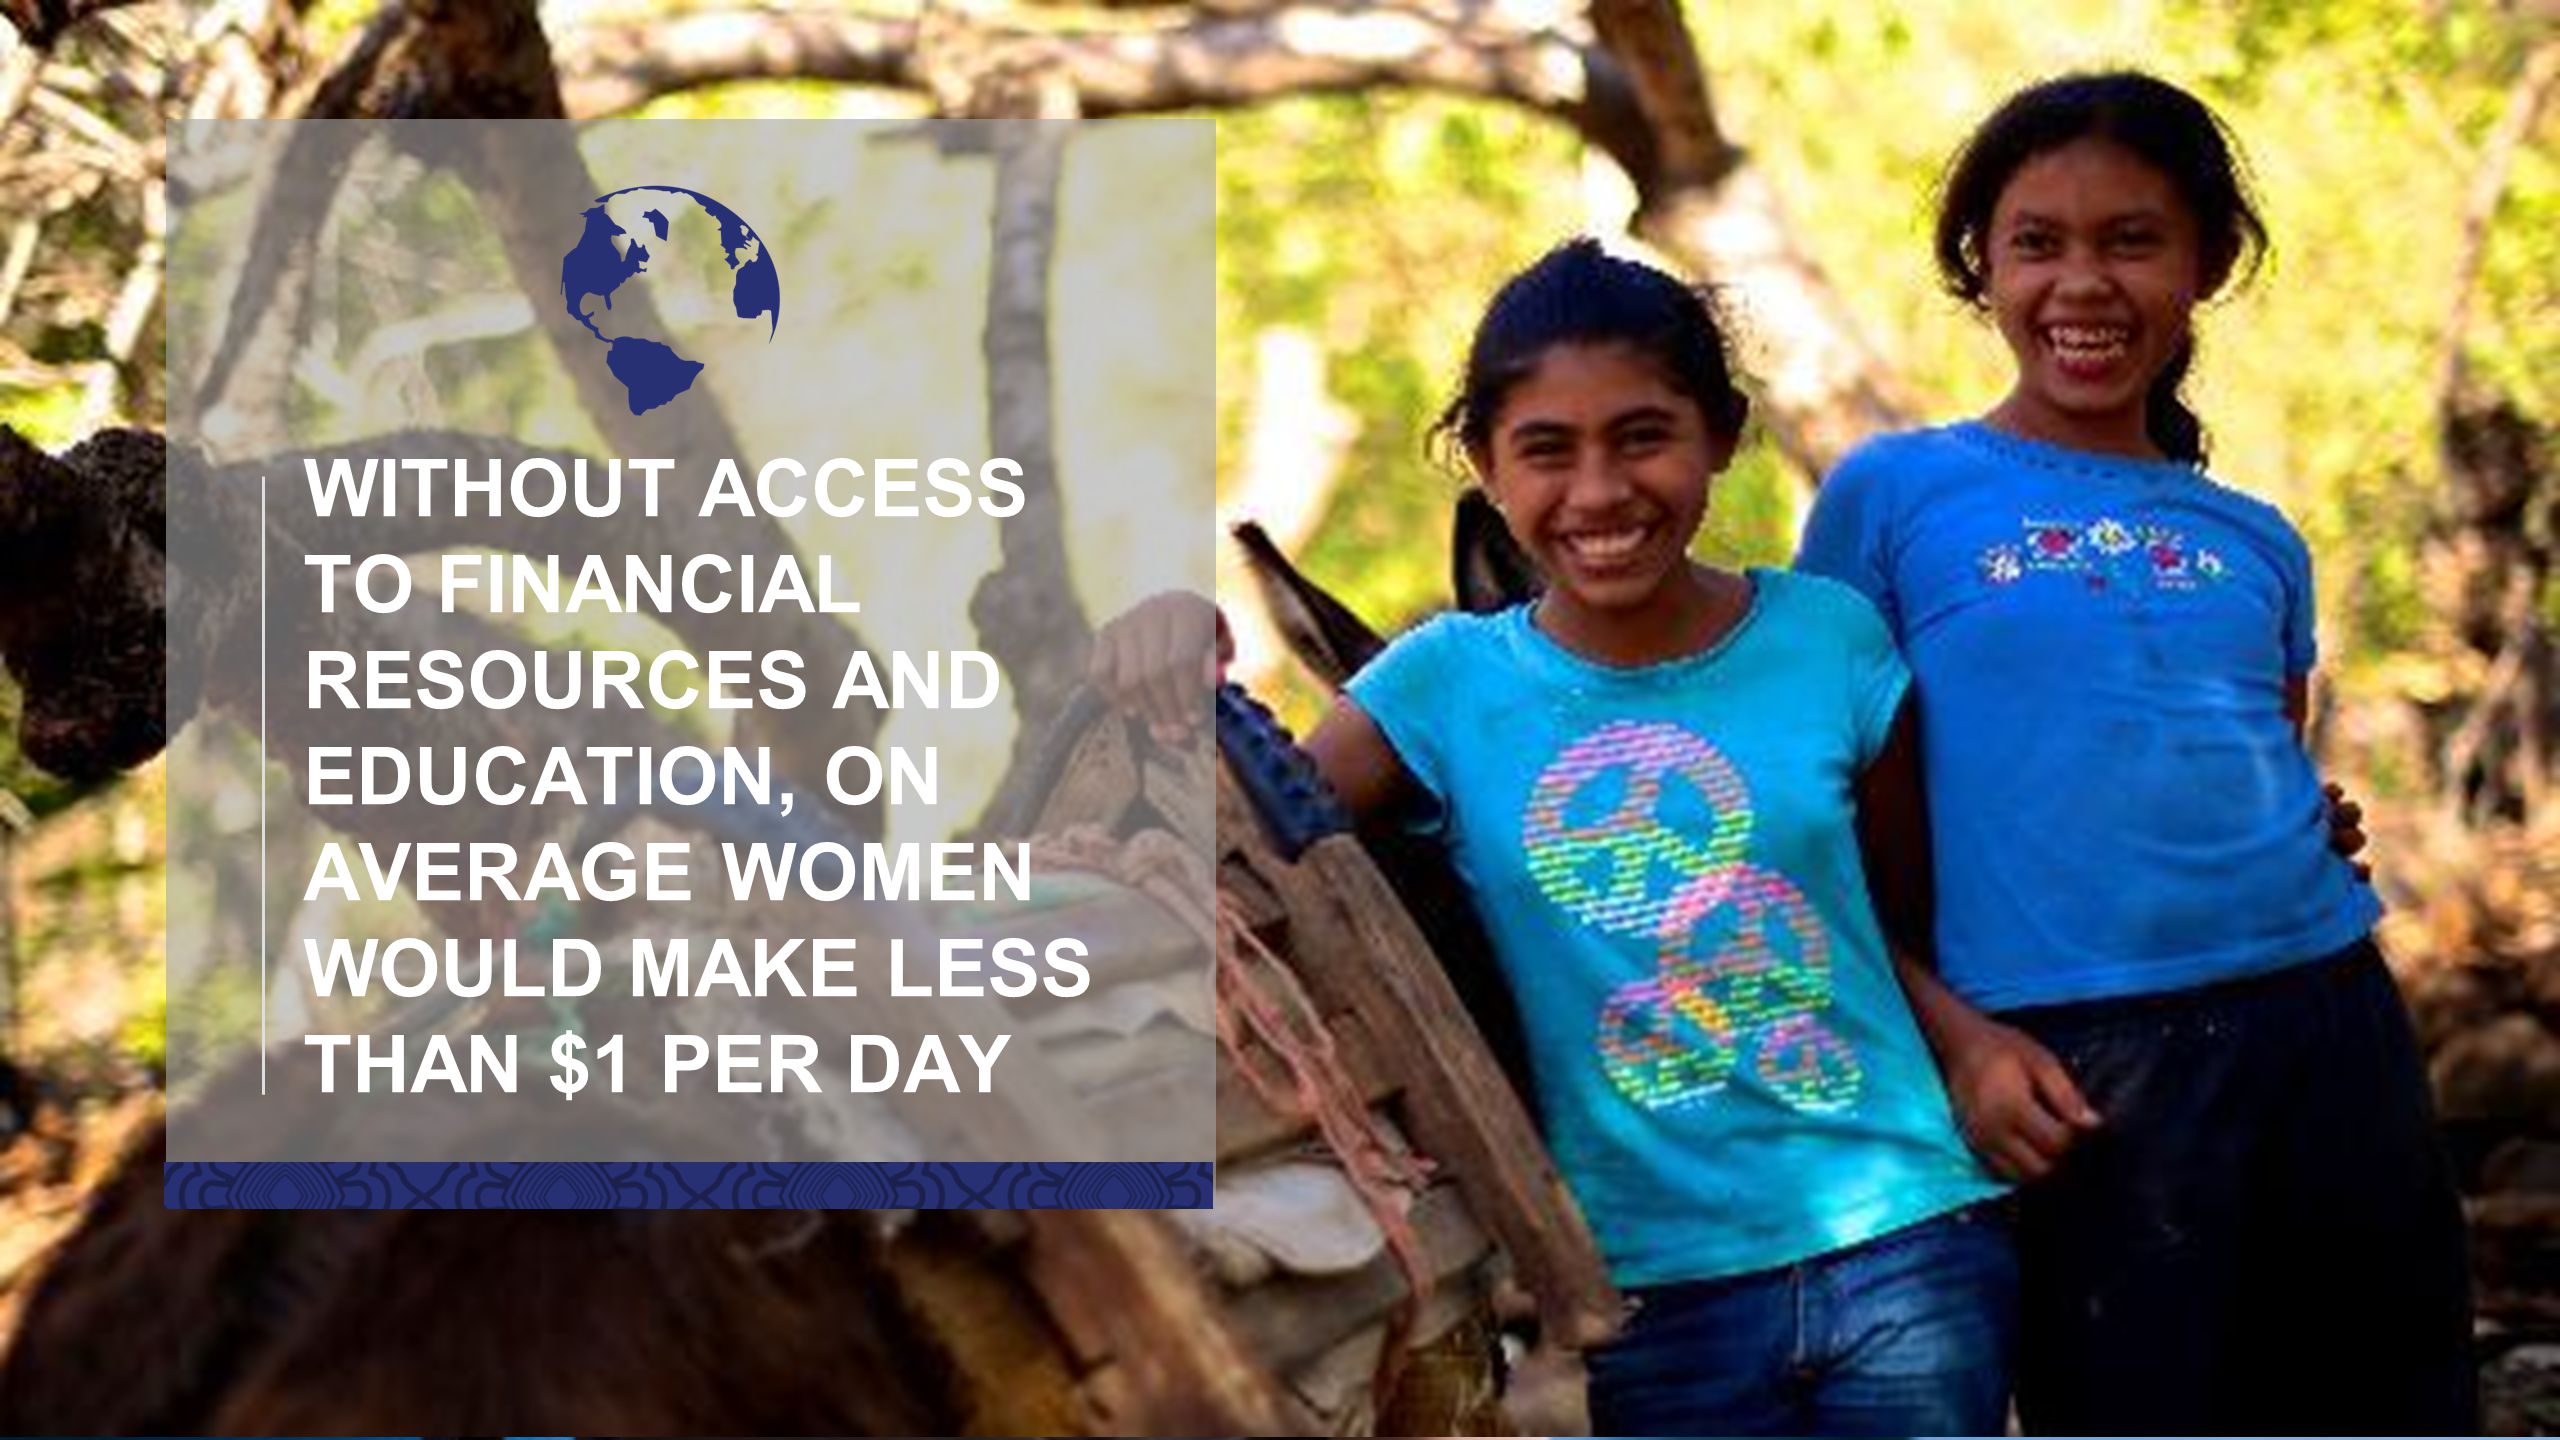 WITHOUT ACCESS TO FINANCIAL RESOURCES AND EDUCATION, ON AVERAGE WOMEN WOULD MAKE LESS THAN $1 PER DAY